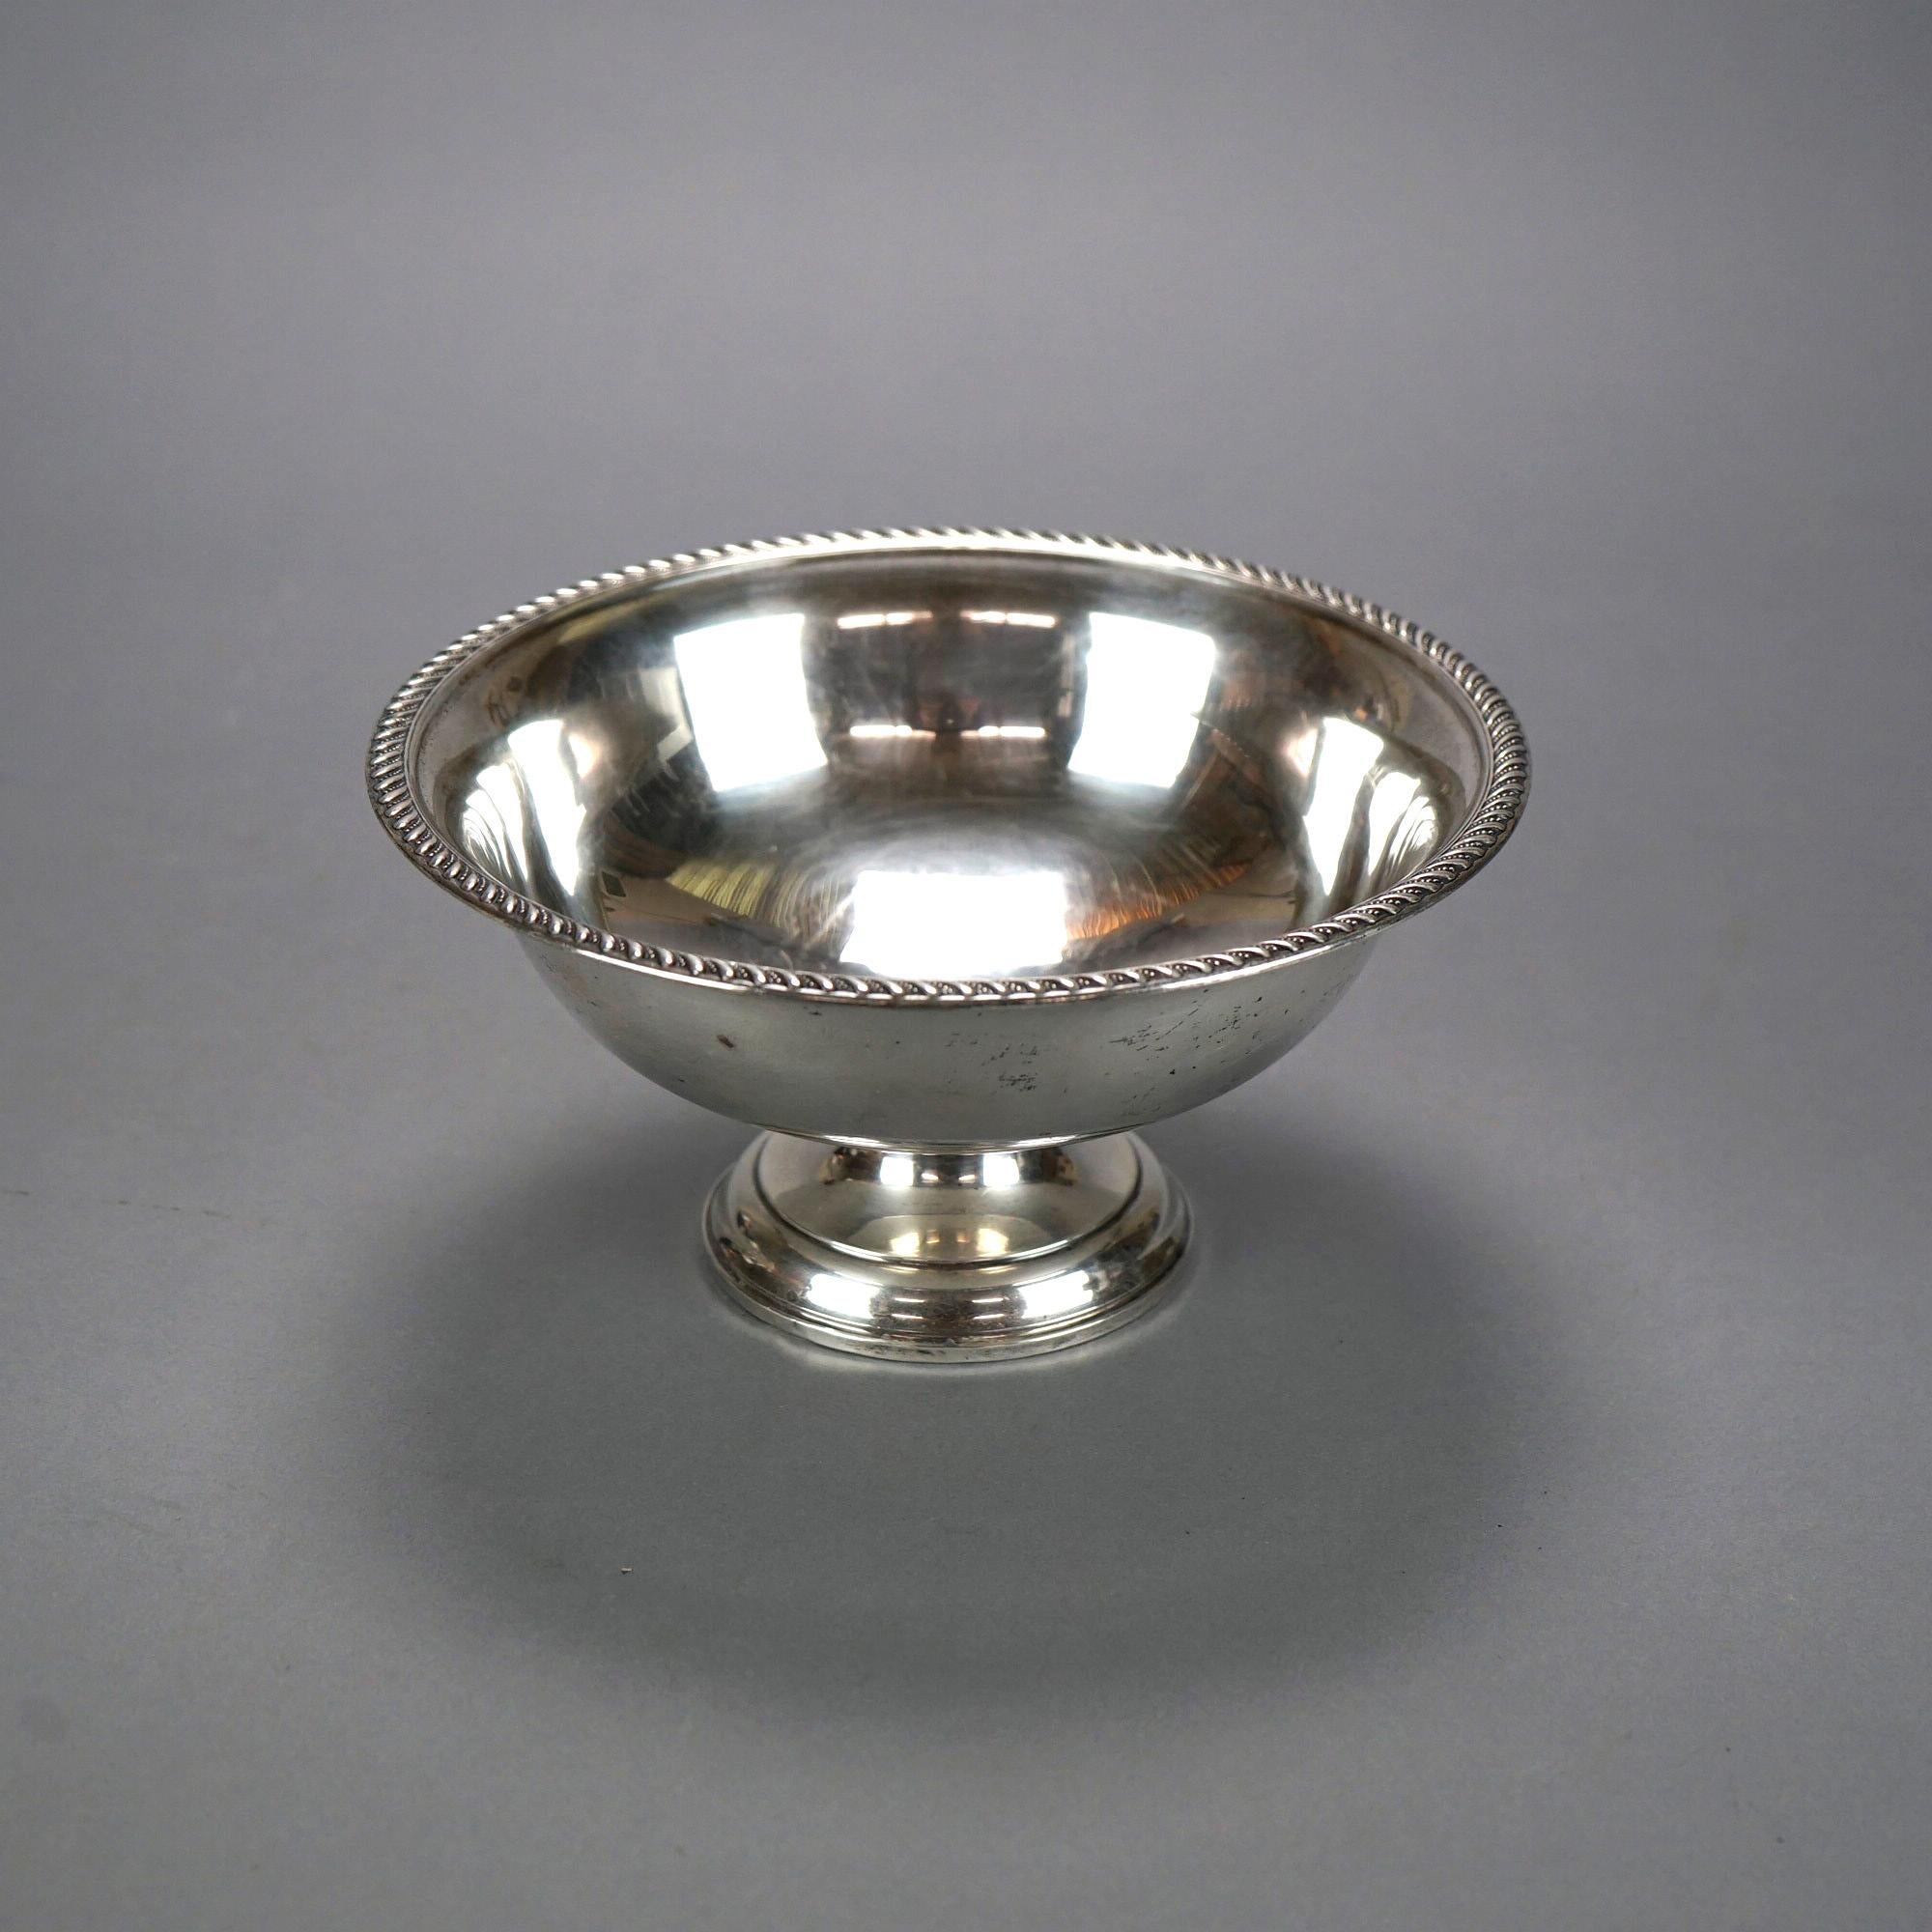 A sterling silver weighted fruit bowl with gadrooned rim, stamped as photographed, 20th century.

Measures- 4.25''H x 8.25''W x 8.25''D.